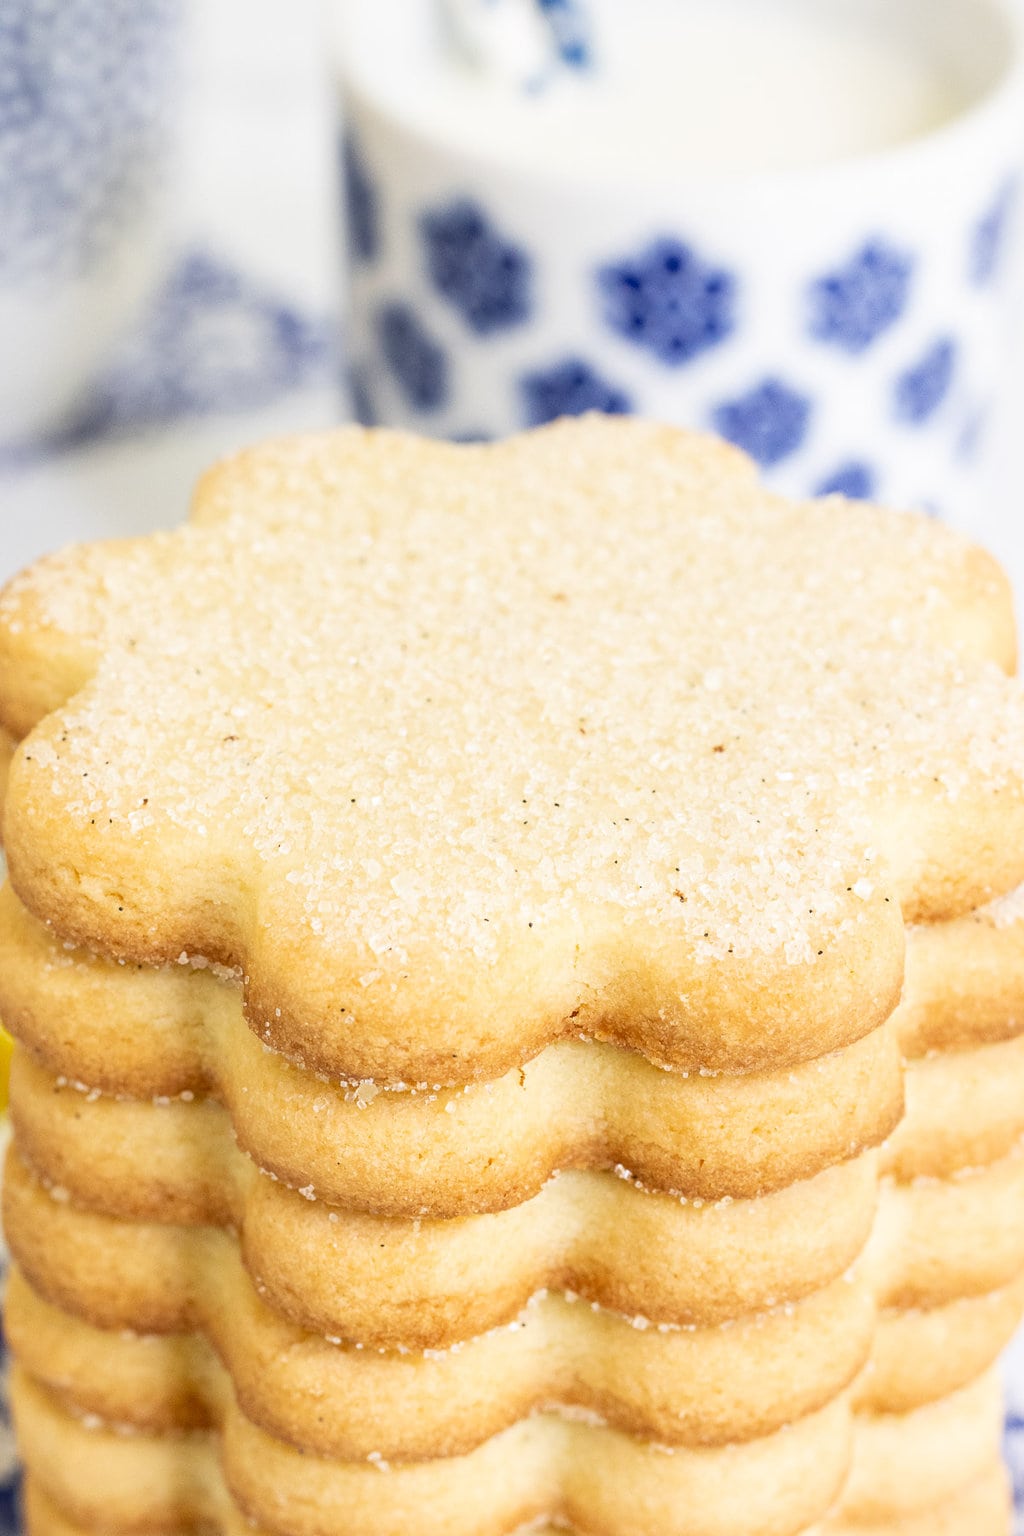 Vertical extreme closeup photo of a stack of French Shortbread Cookies (Sablés Bretons).